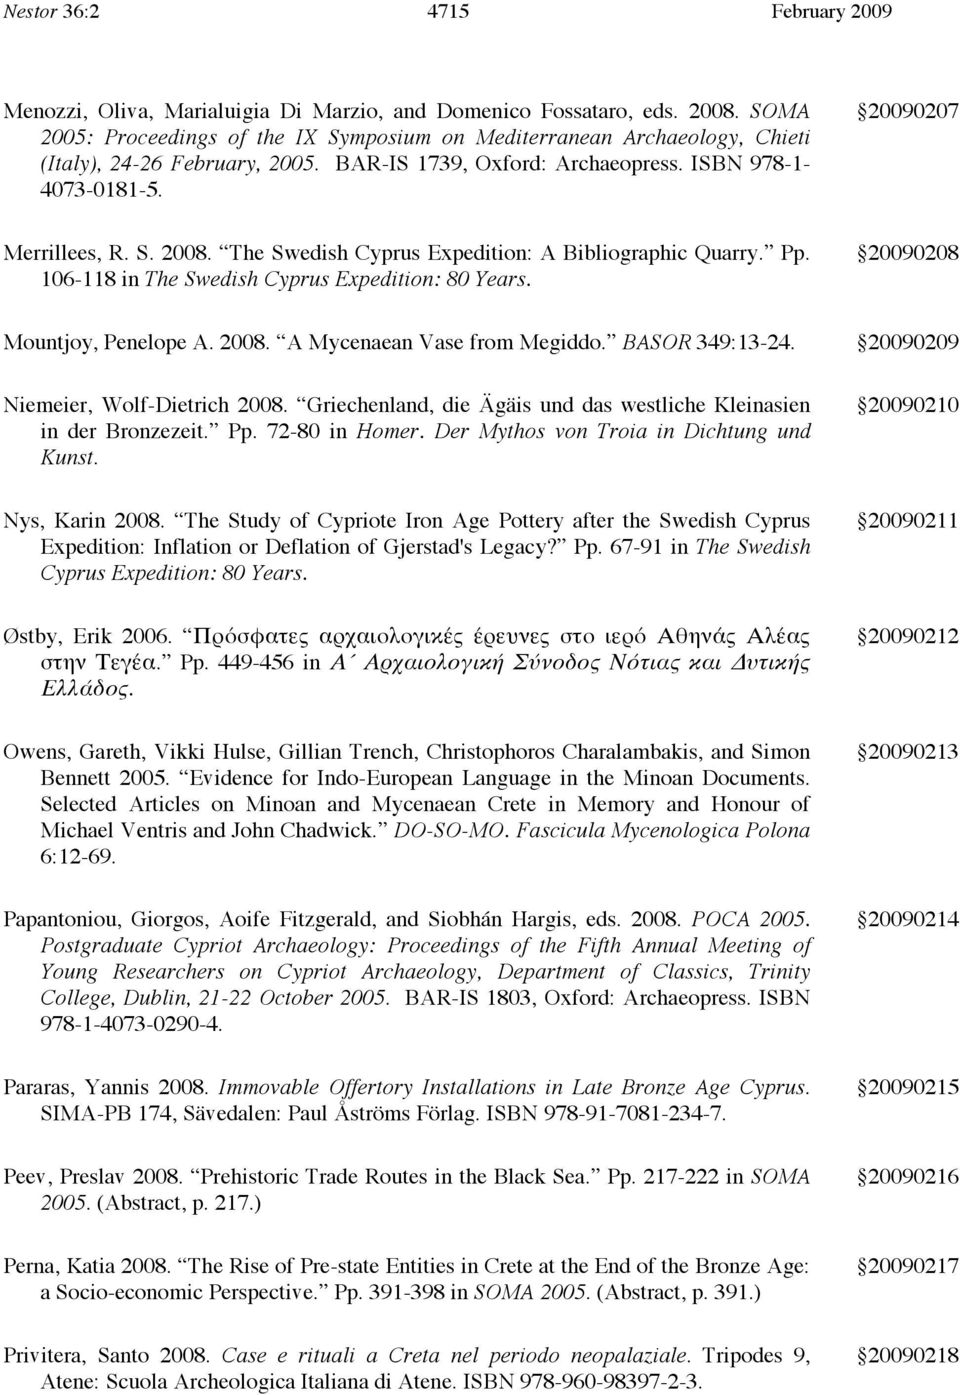 The Swedish Cyprus Expedition: A Bibliographic Quarry. Pp. 106-118 in The Swedish Cyprus Expedition: 80 Years. 20090208 Mountjoy, Penelope A. 2008. A Mycenaean Vase from Megiddo. BASOR 349:13-24.